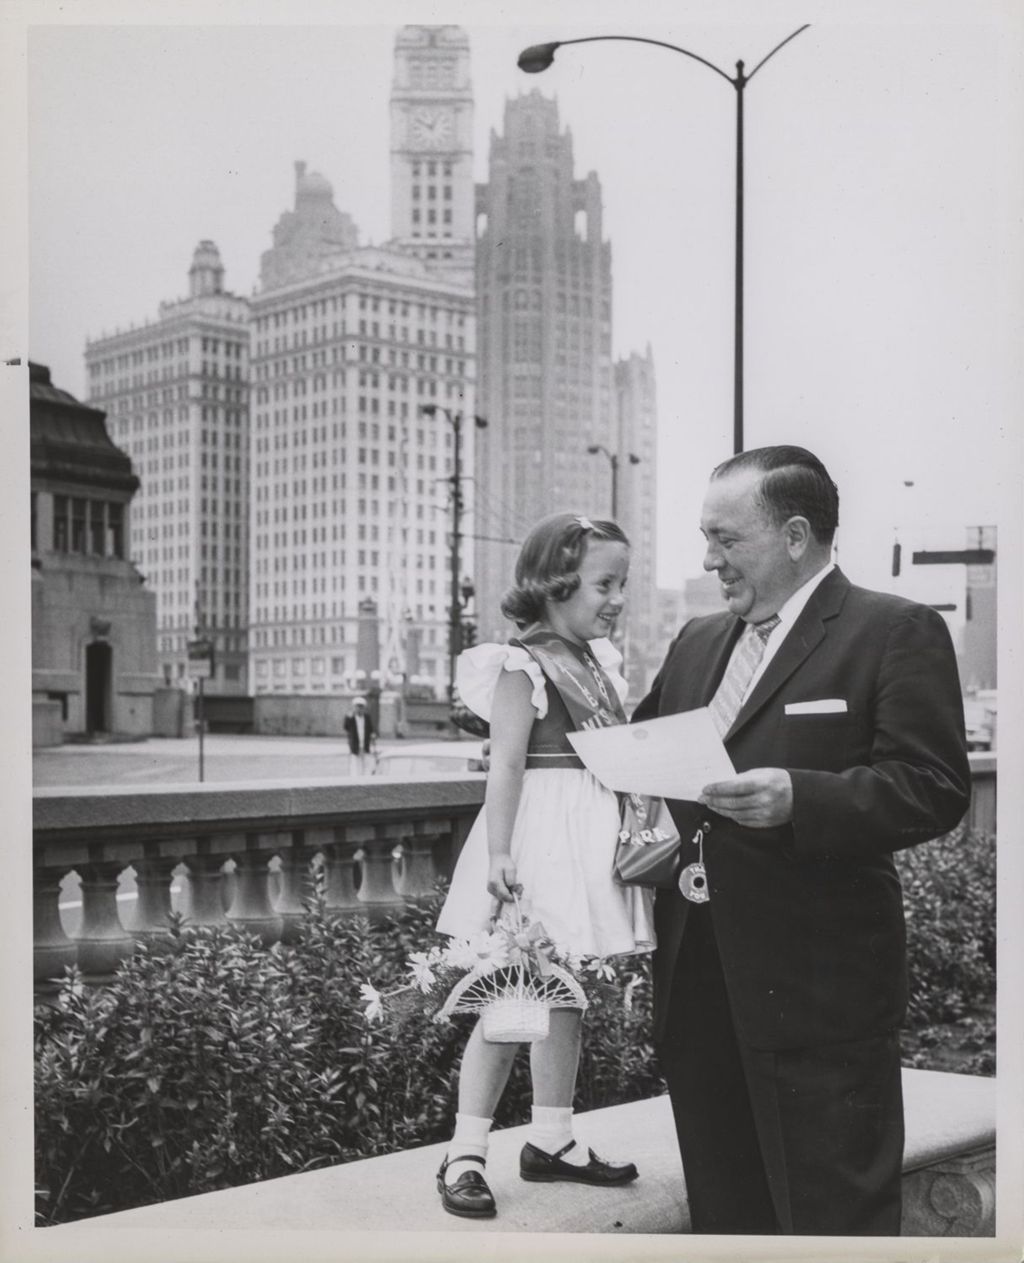 Miniature of Richard J. Daley with Little Miss Rogers Park